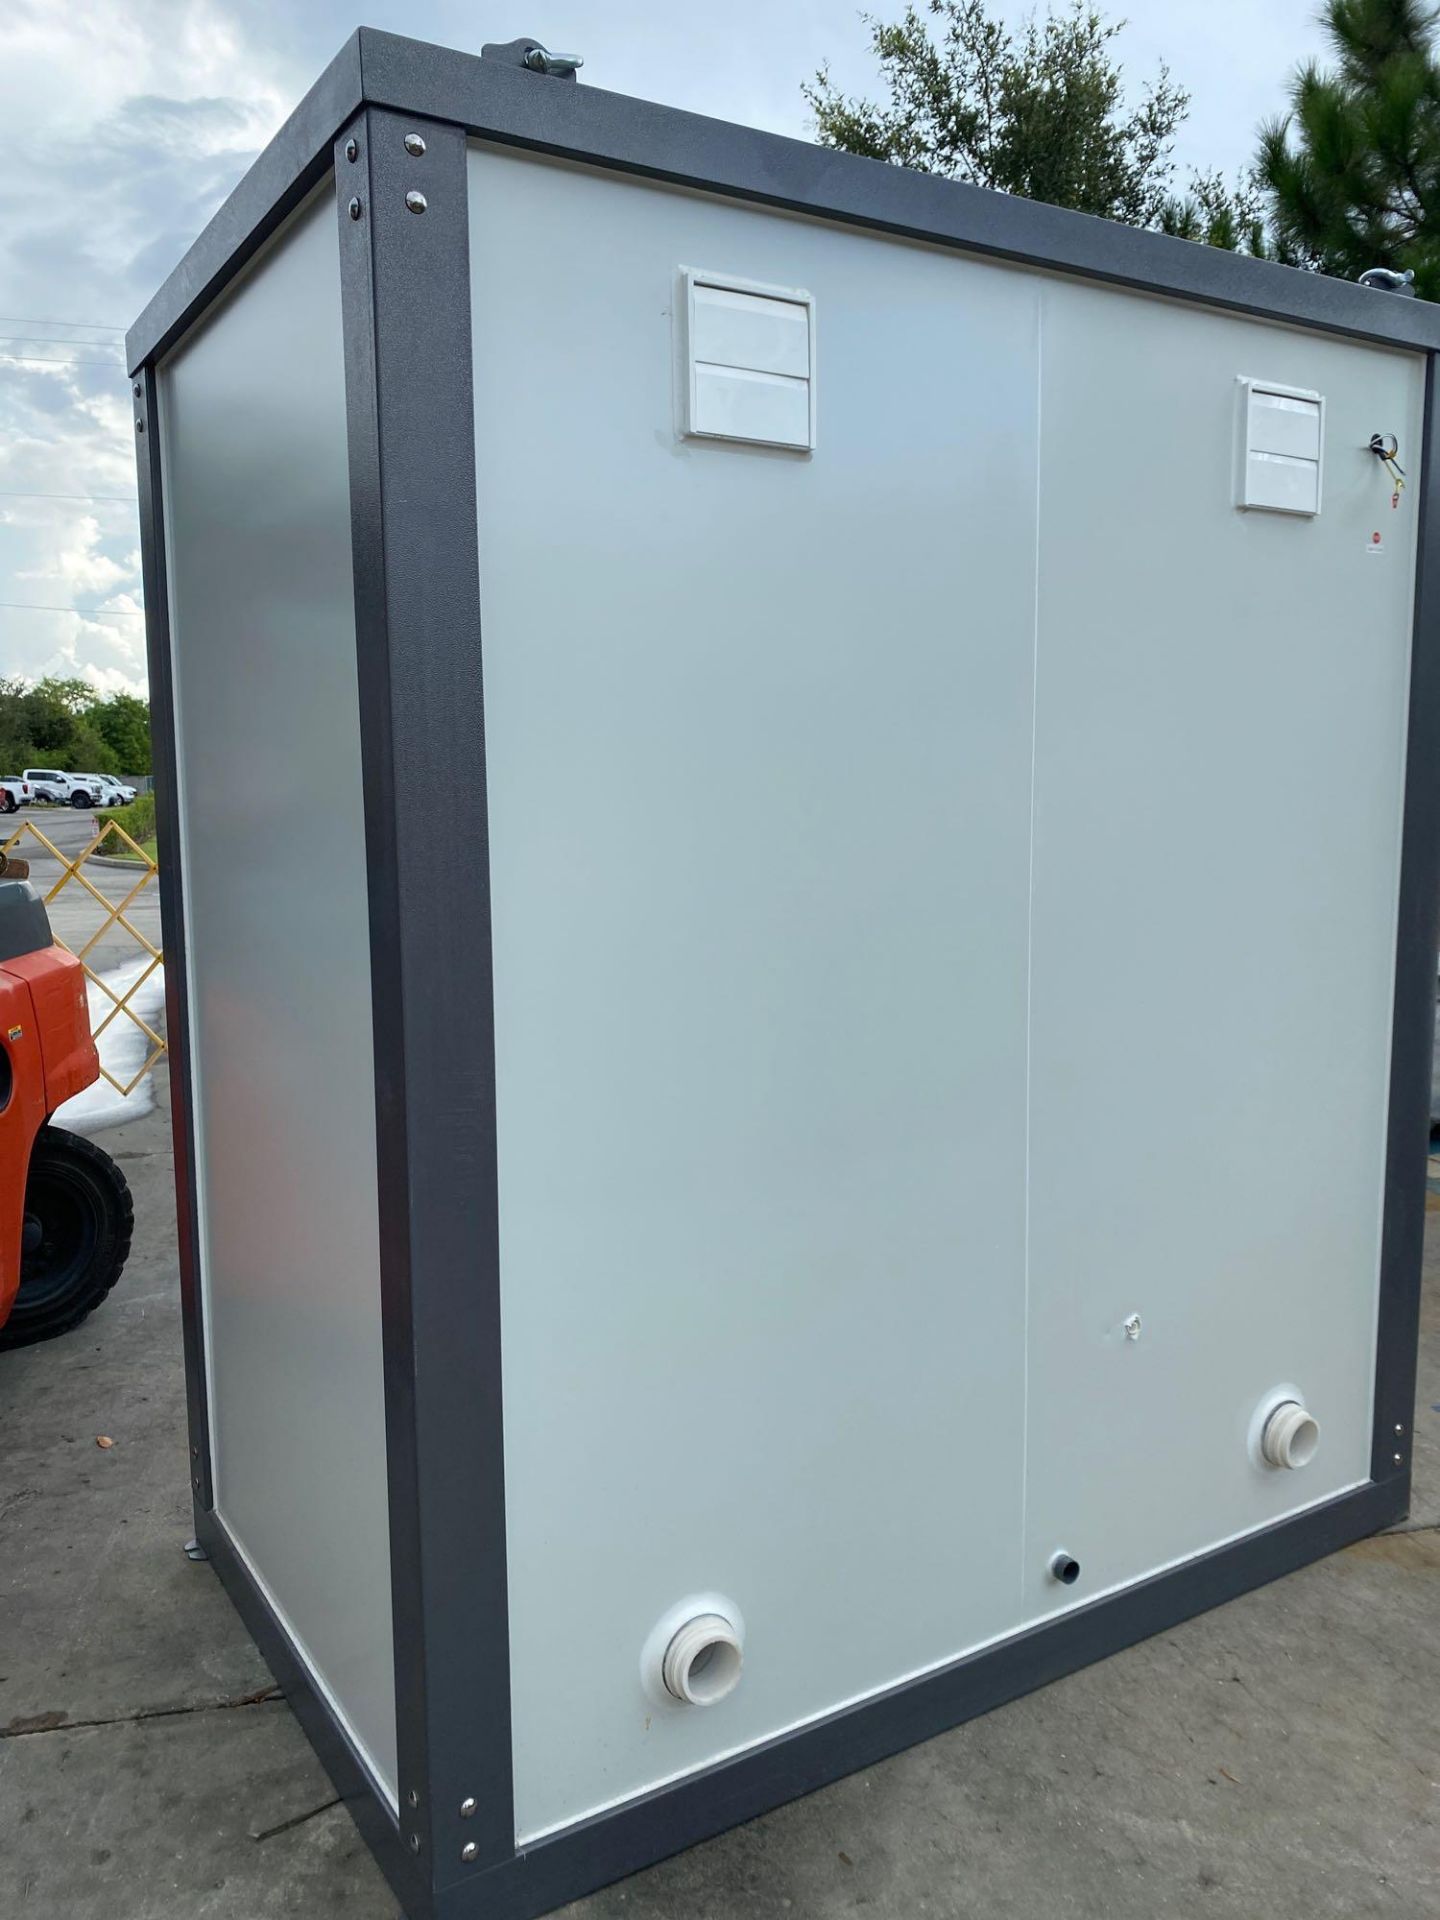 UNUSED PORTABLE 2 STALL BATHROOM UNIT. PLUMBING AND ELECTRIC HOOKUP, FORK POCKETS - Image 2 of 6